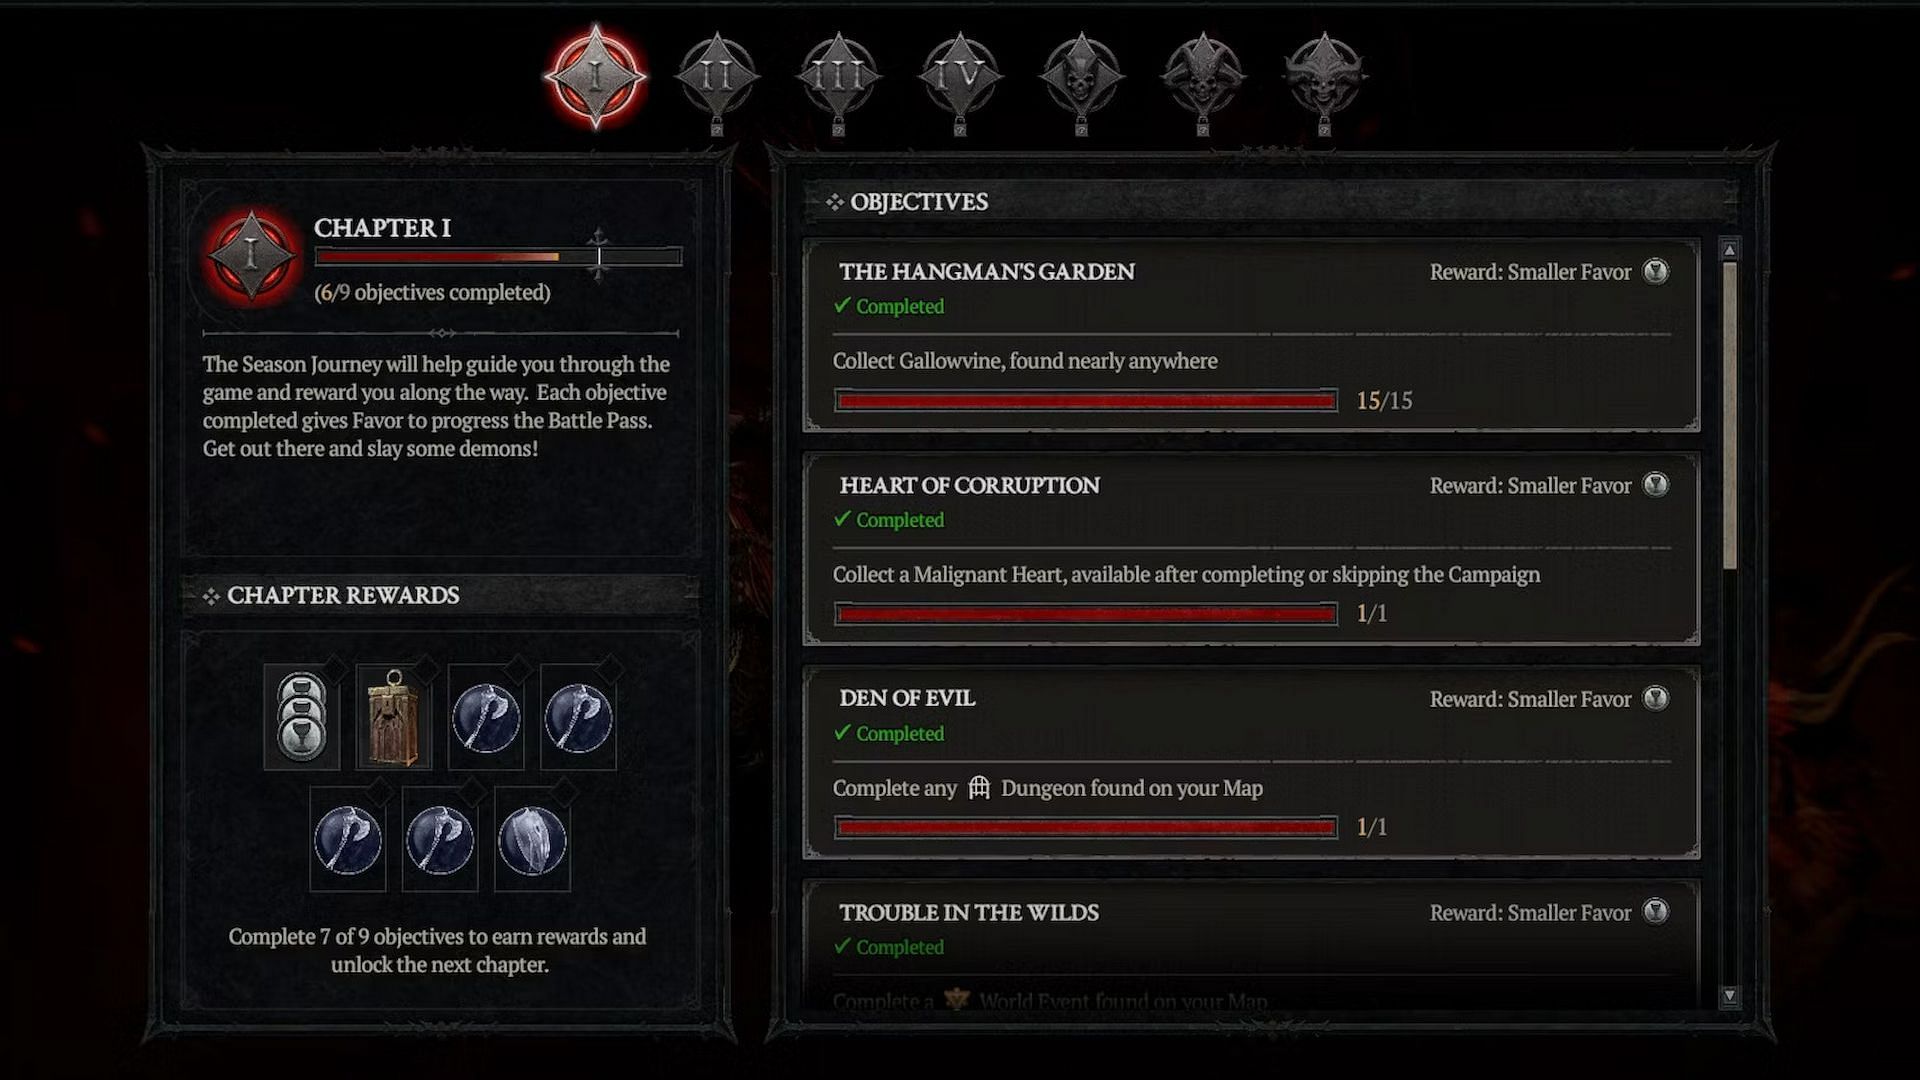 You can obtain Favor by completing seasonal objectives (Image via Diablo 4)